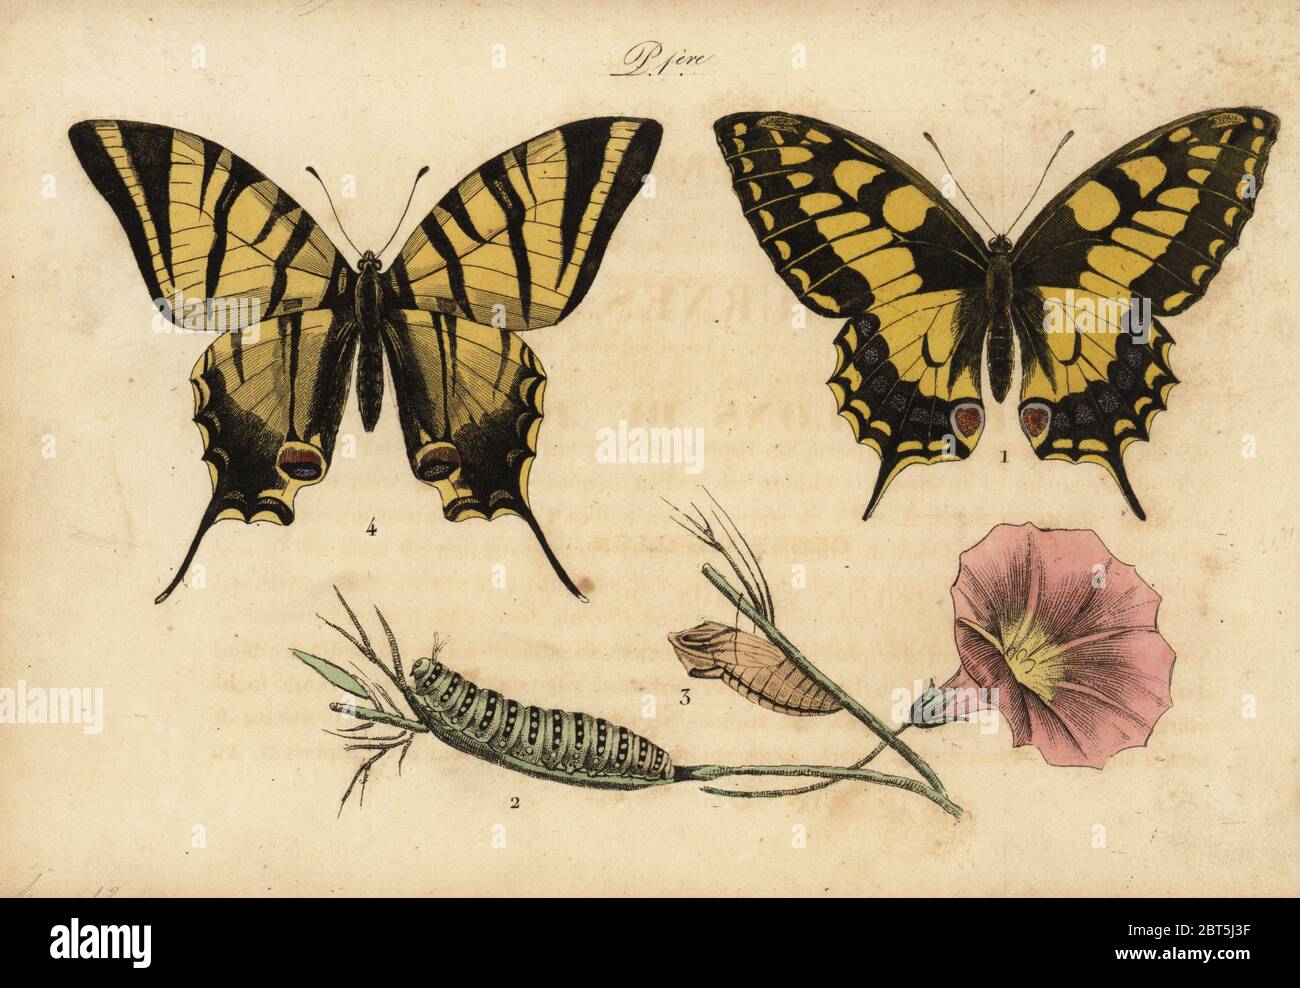 Old World swallowtail, Papillo machaon 1,2,3 and scarce swallowtail, Iphiclides podalirius 4. Handcoloured lithograph from Musee du Naturaliste dedie a la Jeunesse, Histoire des Papillons, Hippolyte and Polydor Pauquet, Paris, 1833. Stock Photo